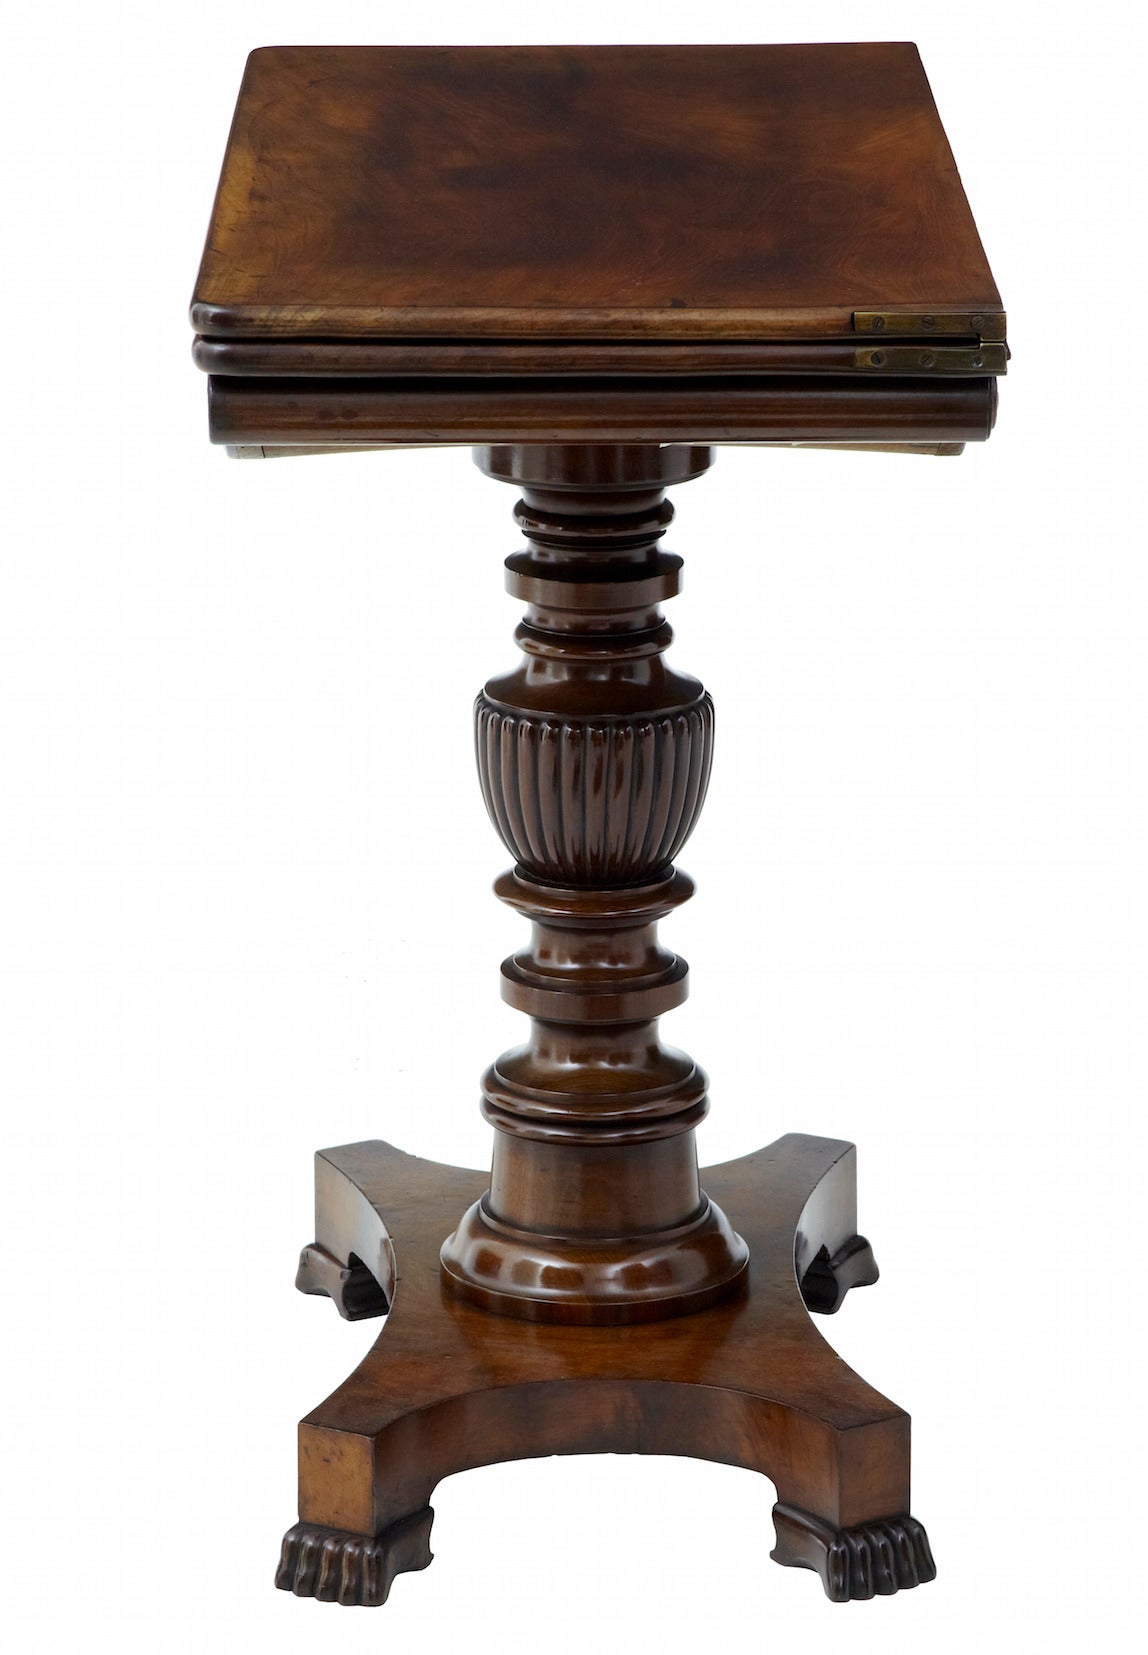 Good quality tea games table of excellent colour and patina, circa 1840.
Flip-top tea table with stunning colour, finest quality mahogany.
Carved frieze and roundels to the front, standing on turned stem and quadriform base and sledge toe'd